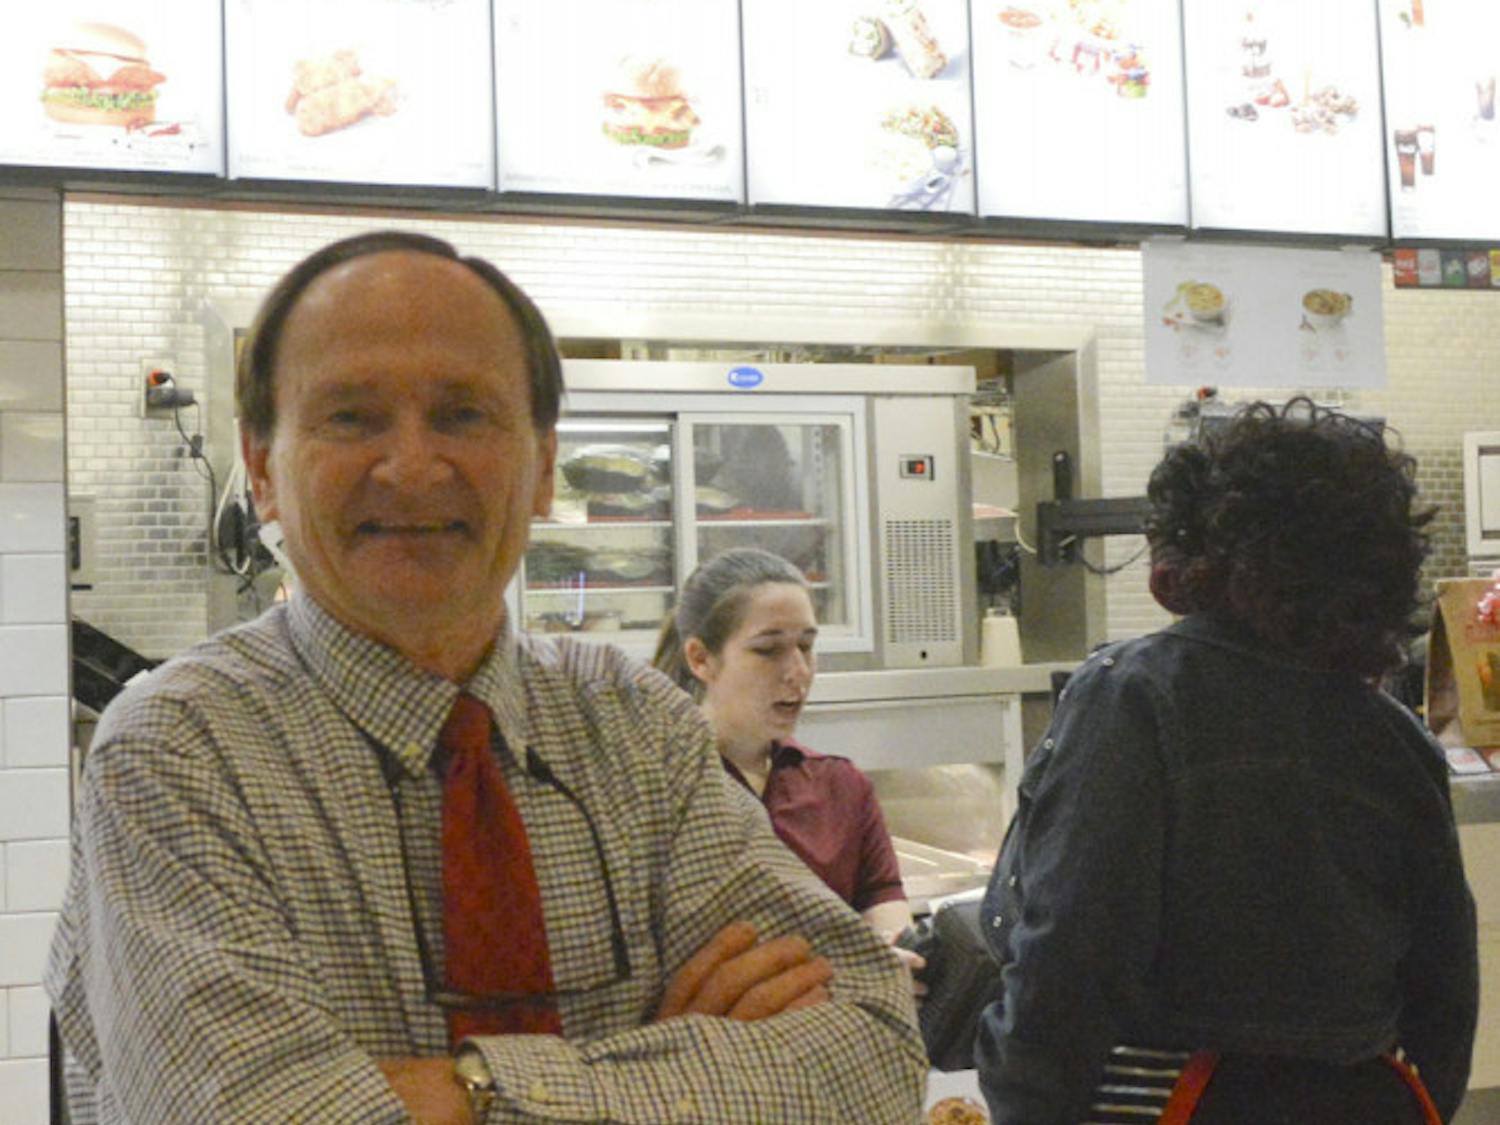 Steve Carroll, owner of the Oaks Mall’s last locally owned store, stands in Chick-fil-a and poses for a picture. Carroll’s restaurant opened in 1978 and was one of the mall’s original stores.